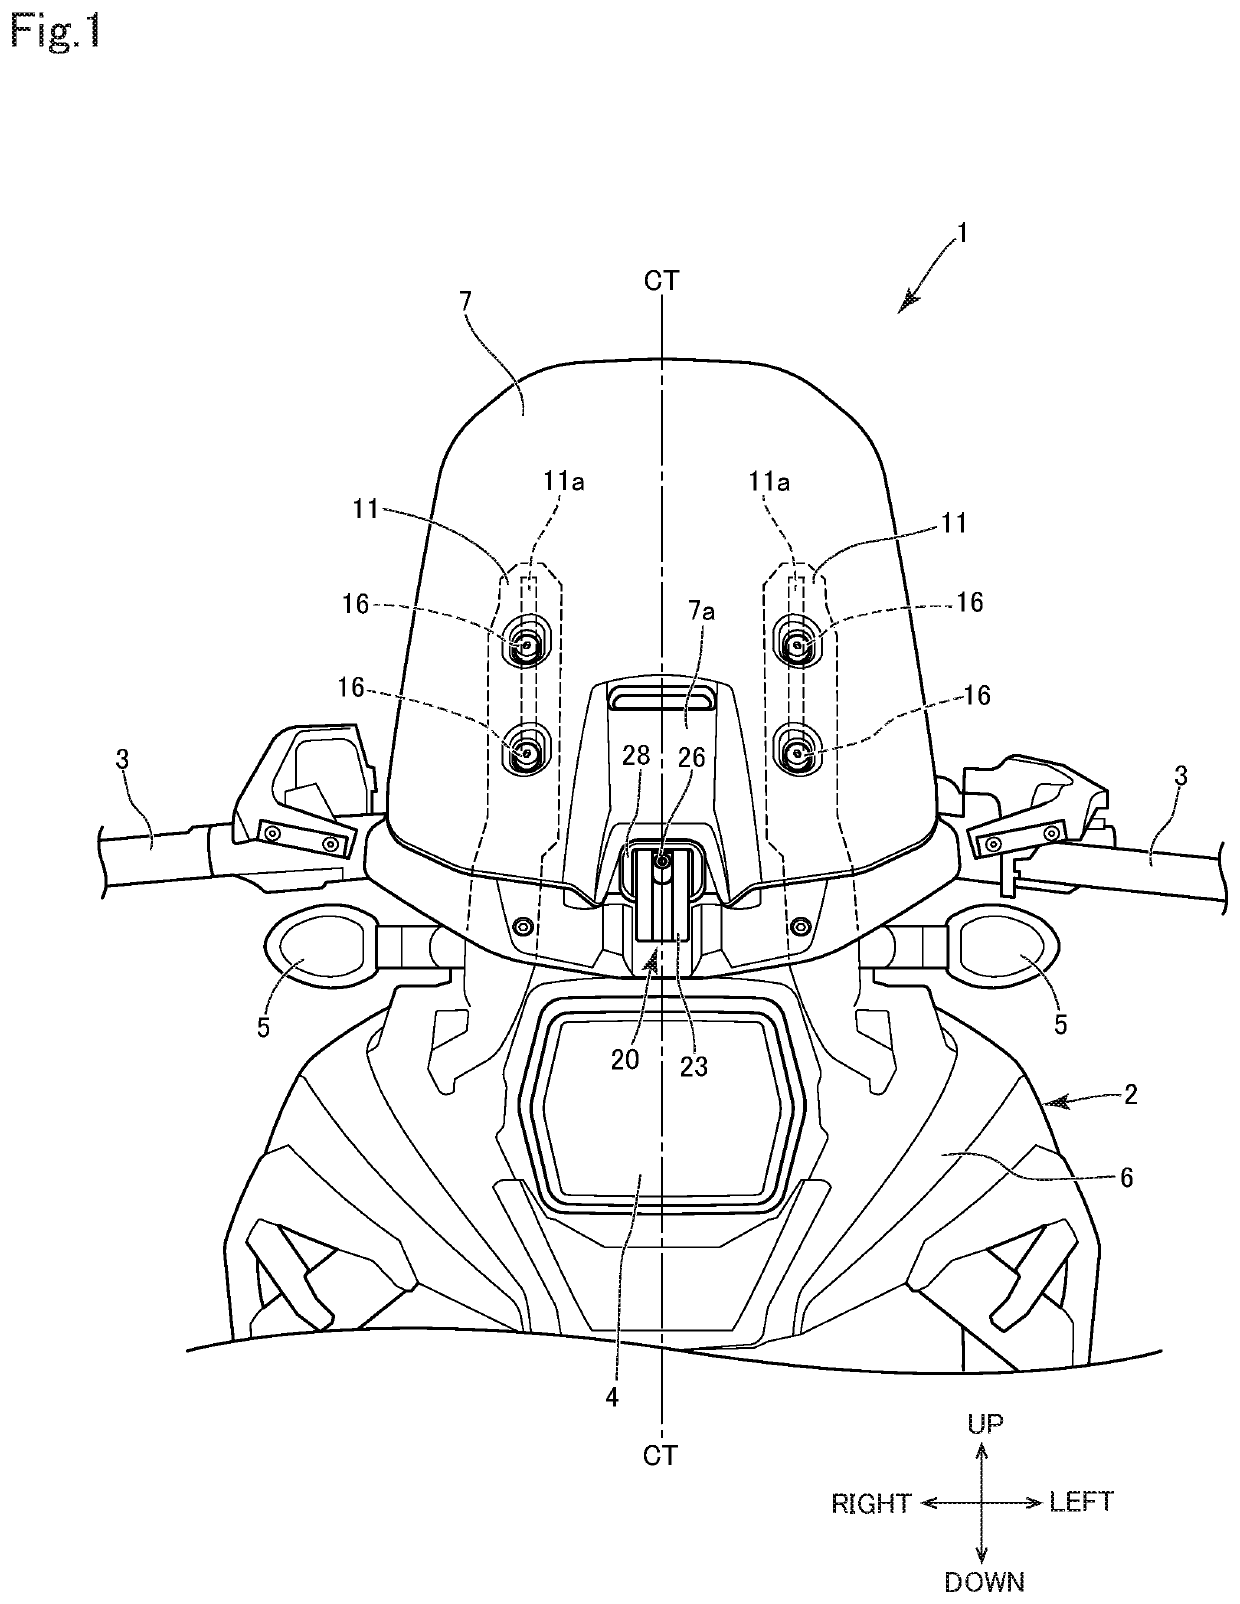 Windshield device for vehicle